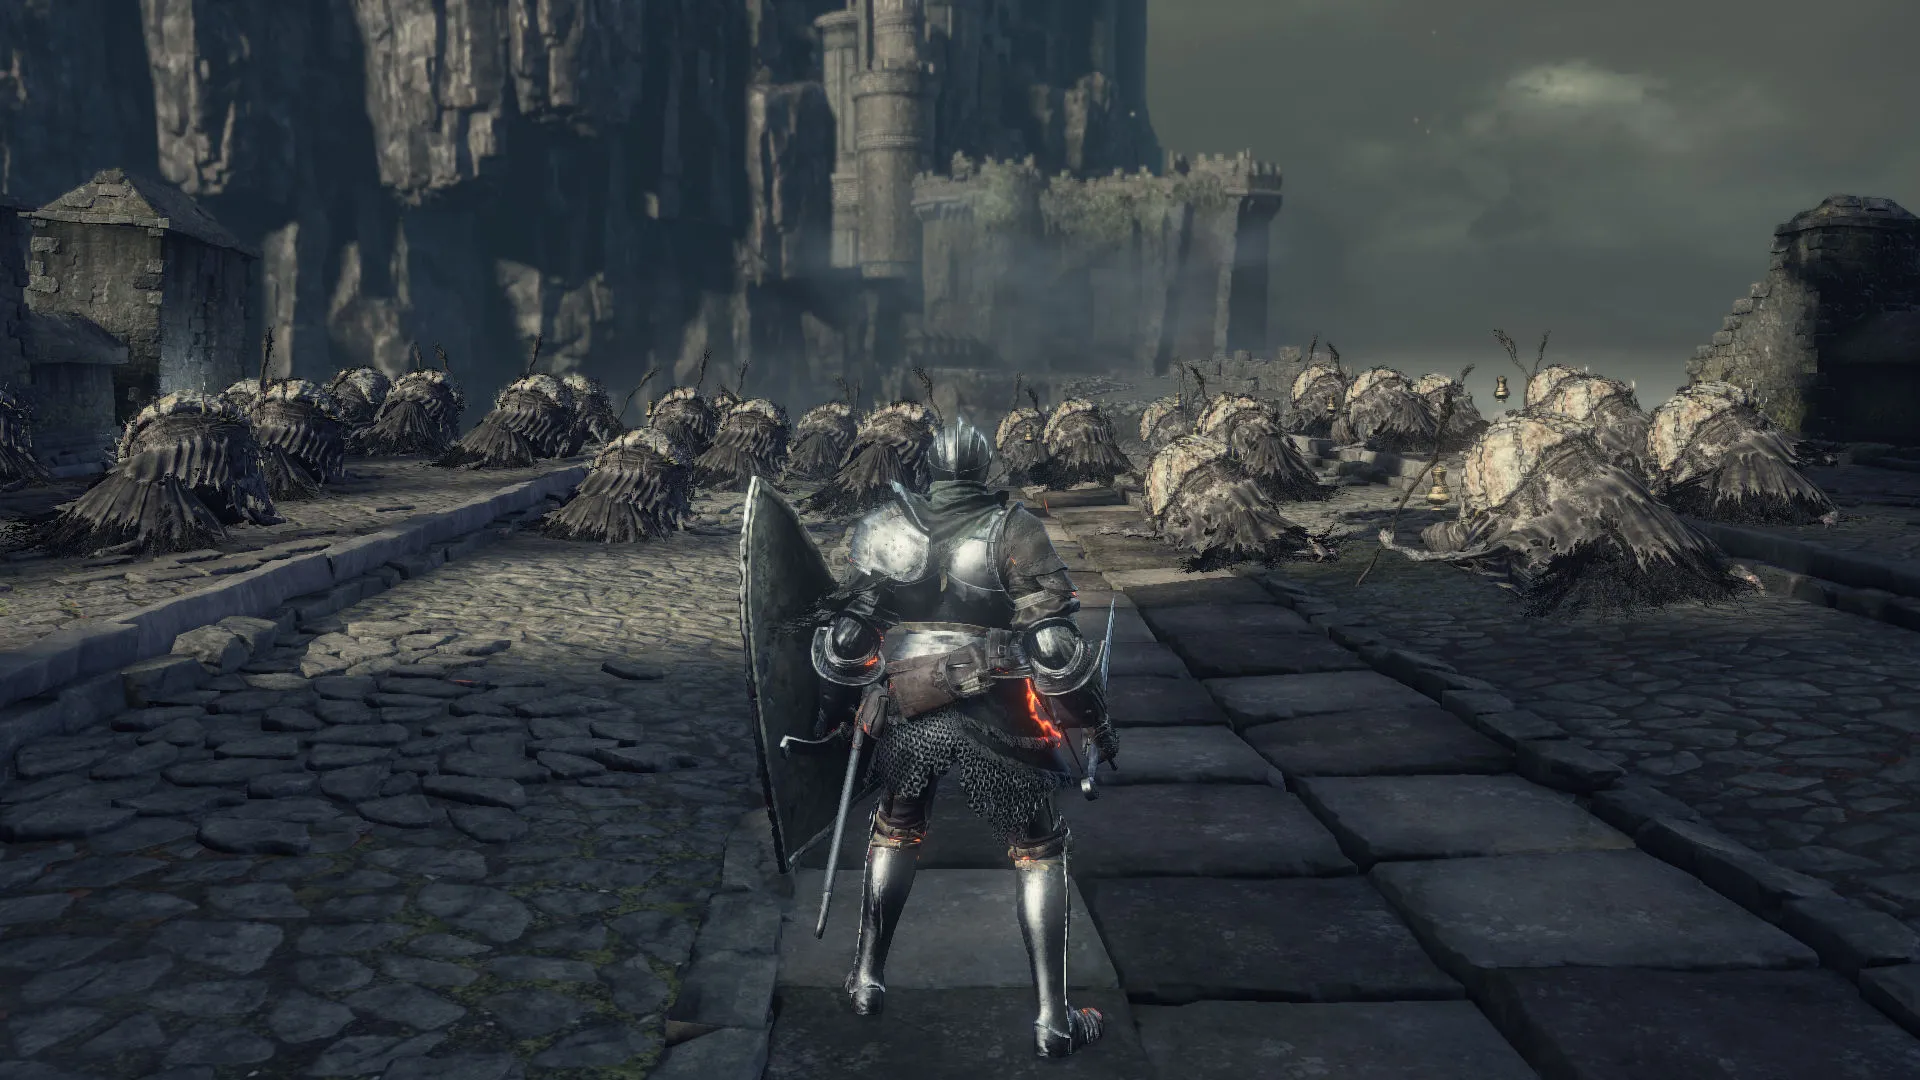 Dark souls 3 is the best game ever. Except the poise issue, that